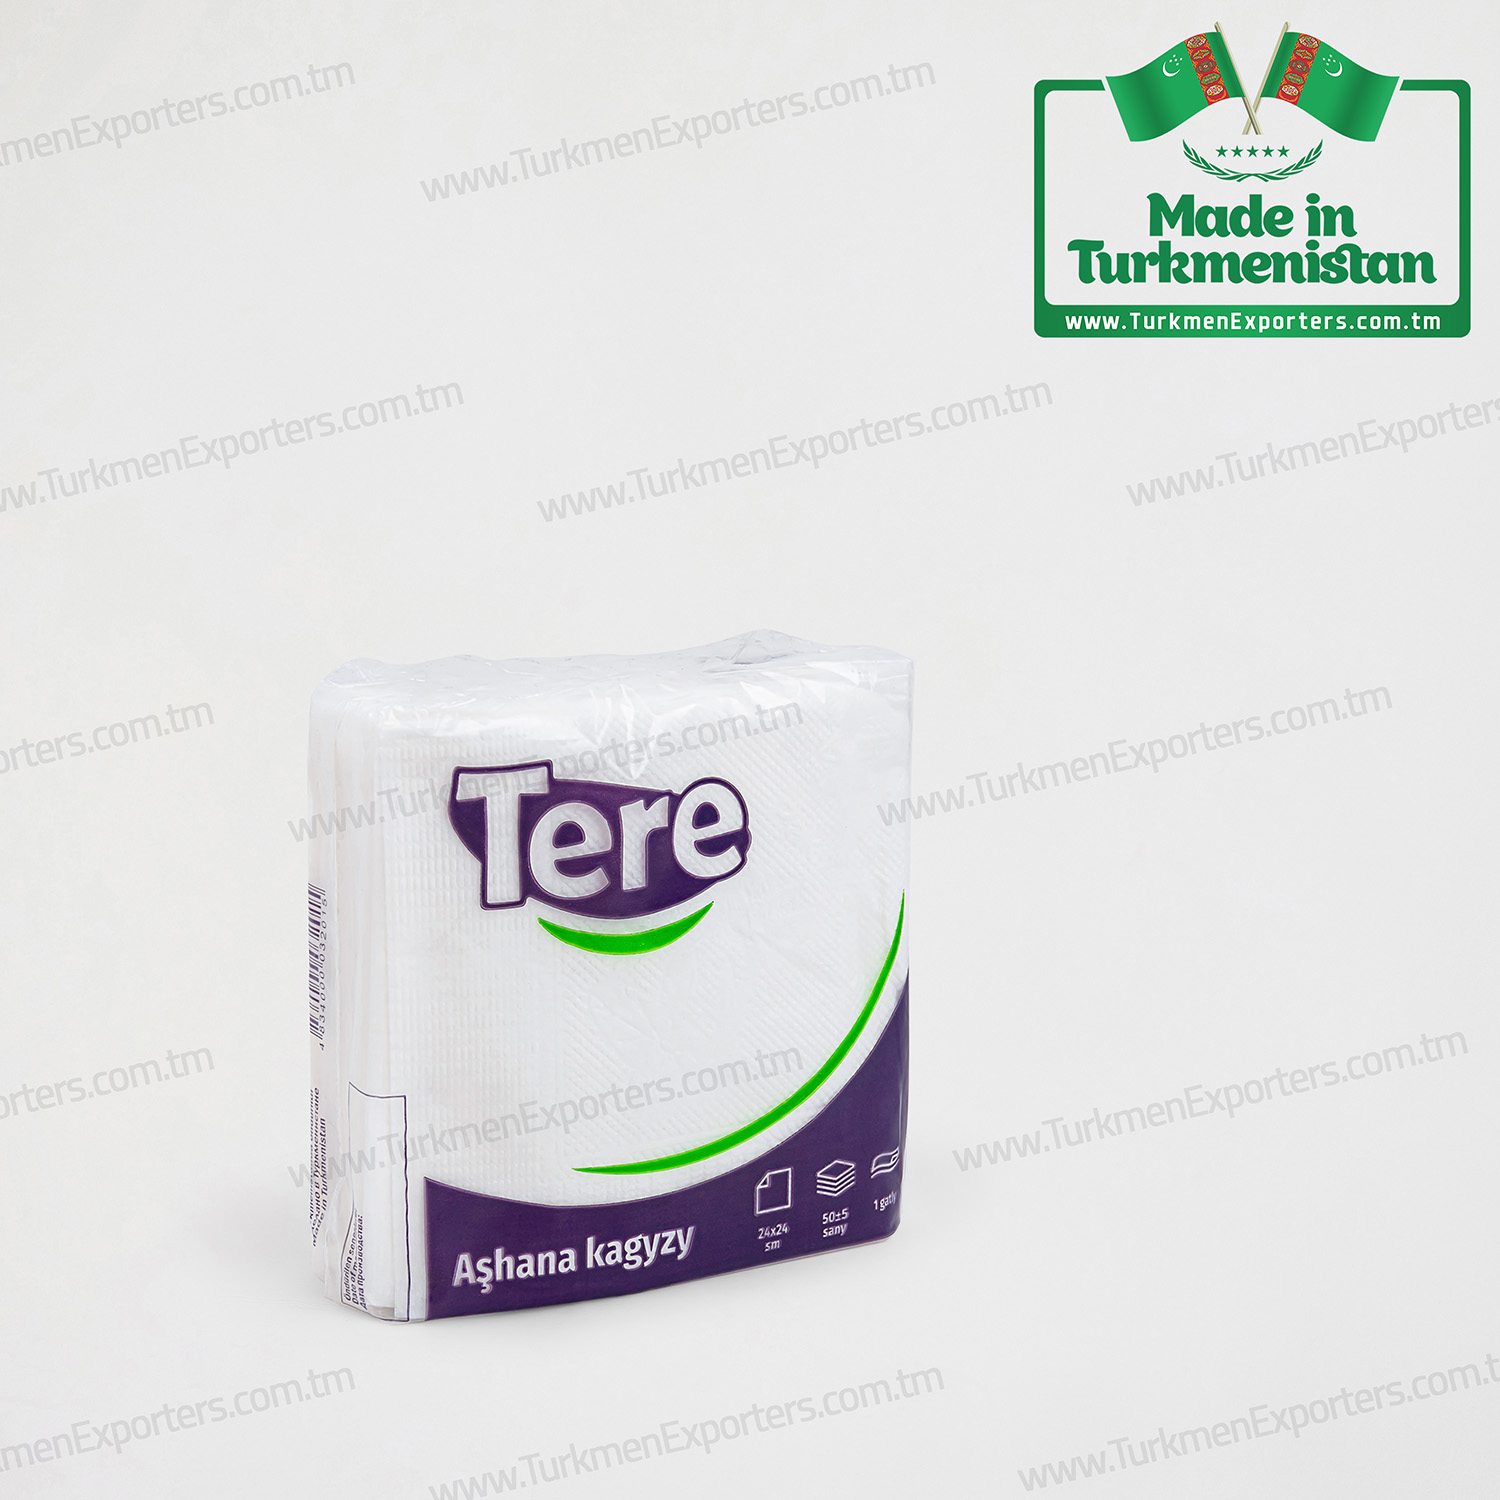 Paper napkins Made in Turkmenistan | Tere paper factory